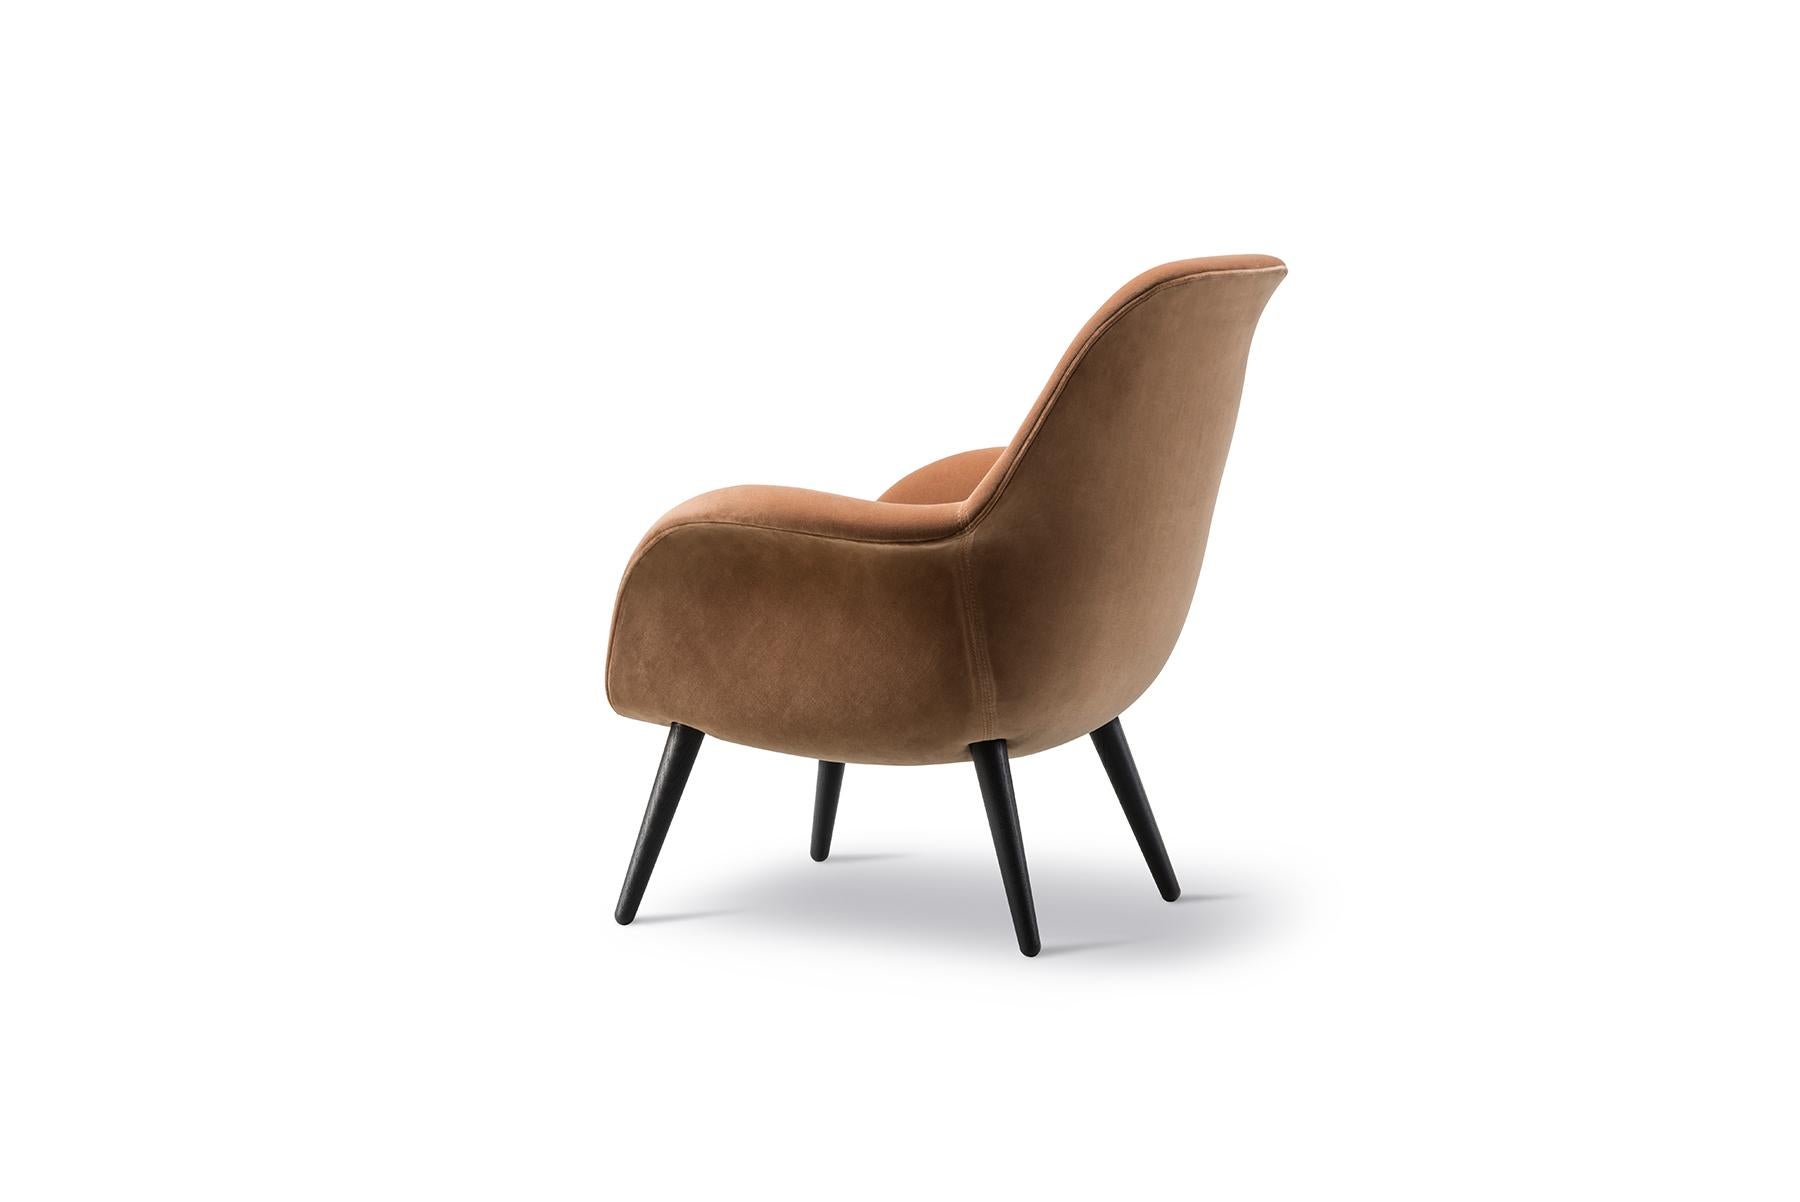 Space Copenhagen swoon lounge chair – Petit A line extension from the Swoon lounge, the Swoon lounge Petit has a similar shape but it’s more upright and somewhat smaller. The one-piece shell merging the back, seat and armrests are fully upholstered